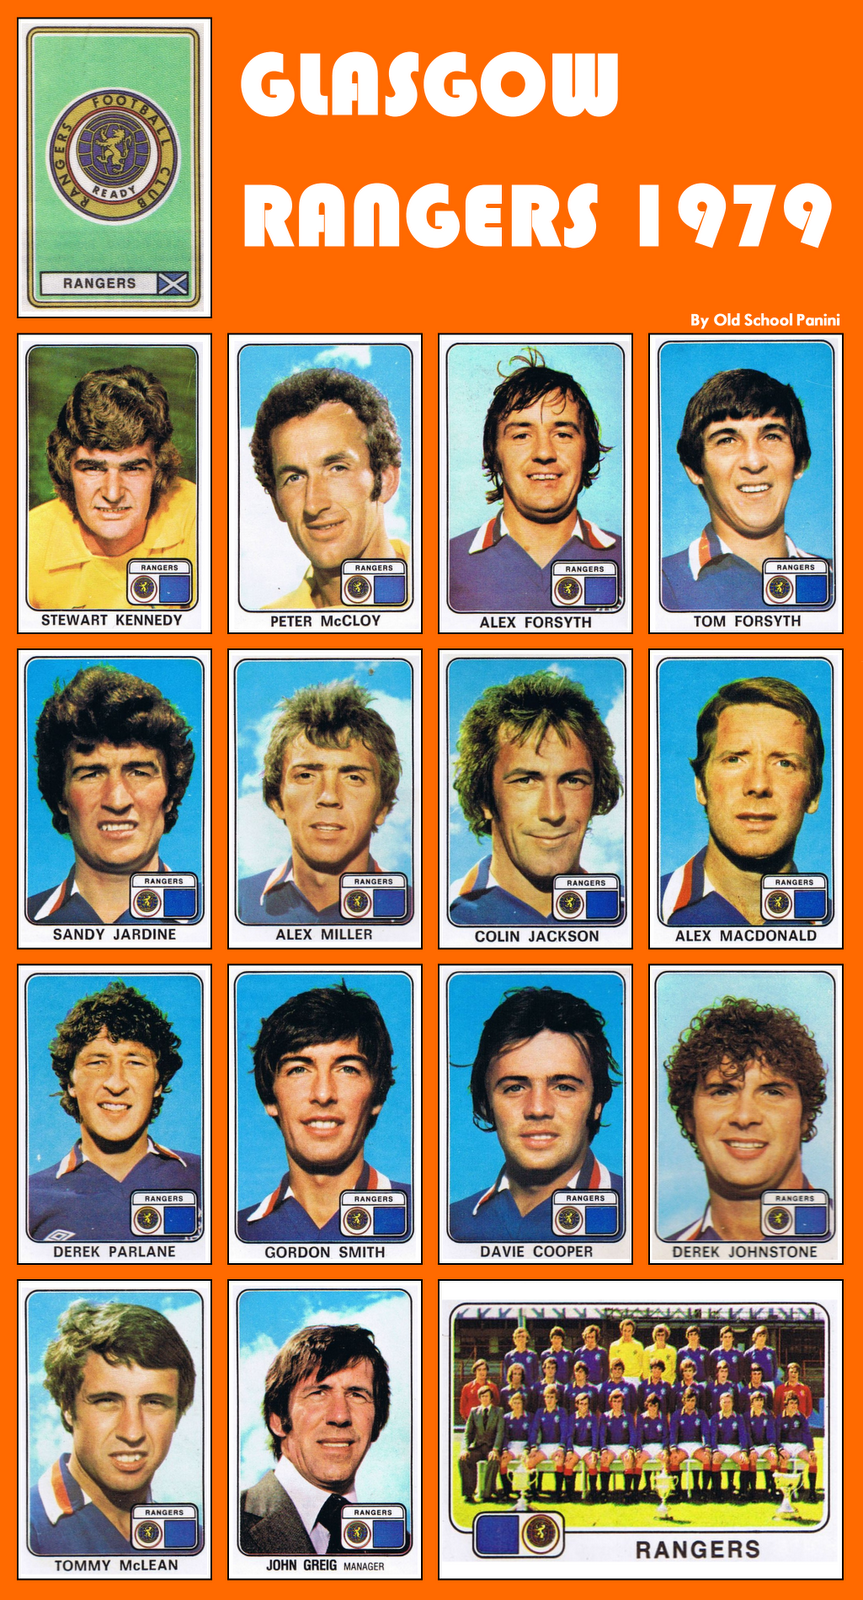 Equipe+Roster+Panini+Glasgow+Rangers+1979.png